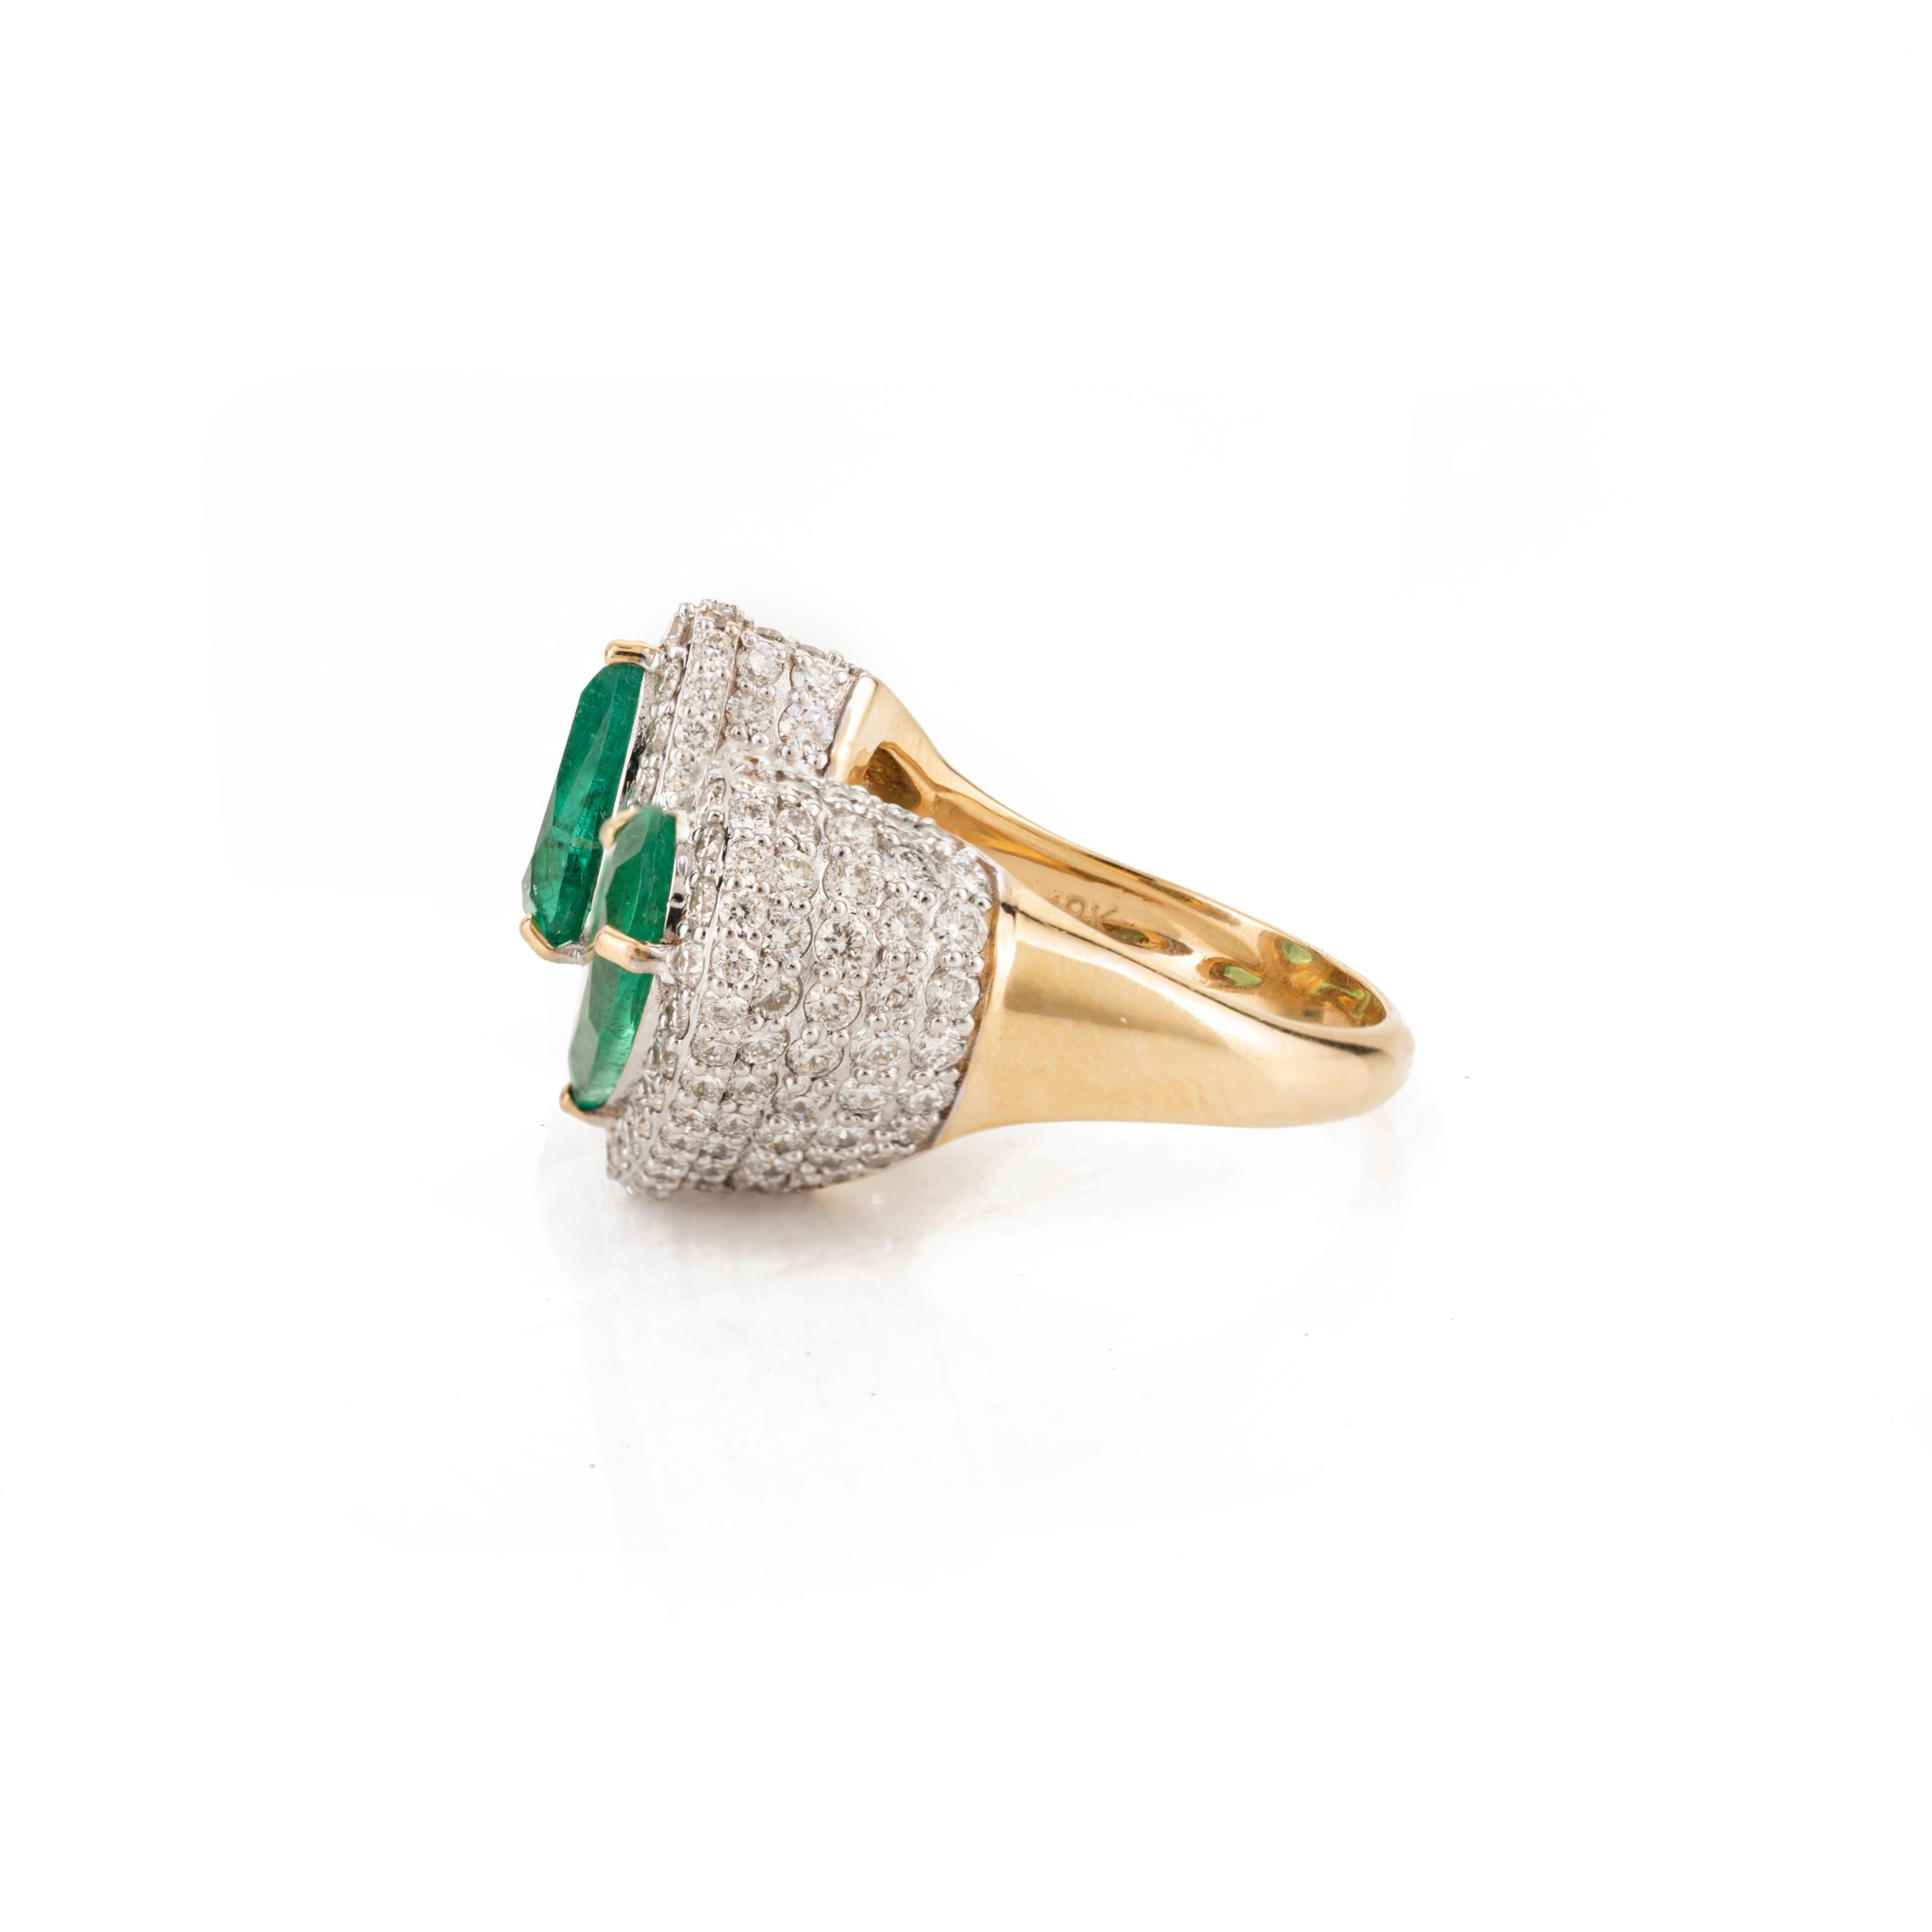 For Sale:  18k Yellow Gold 3.13 Carat Emerald and 3.38 Carat Halo Diamond Toi et Moi Ring 5